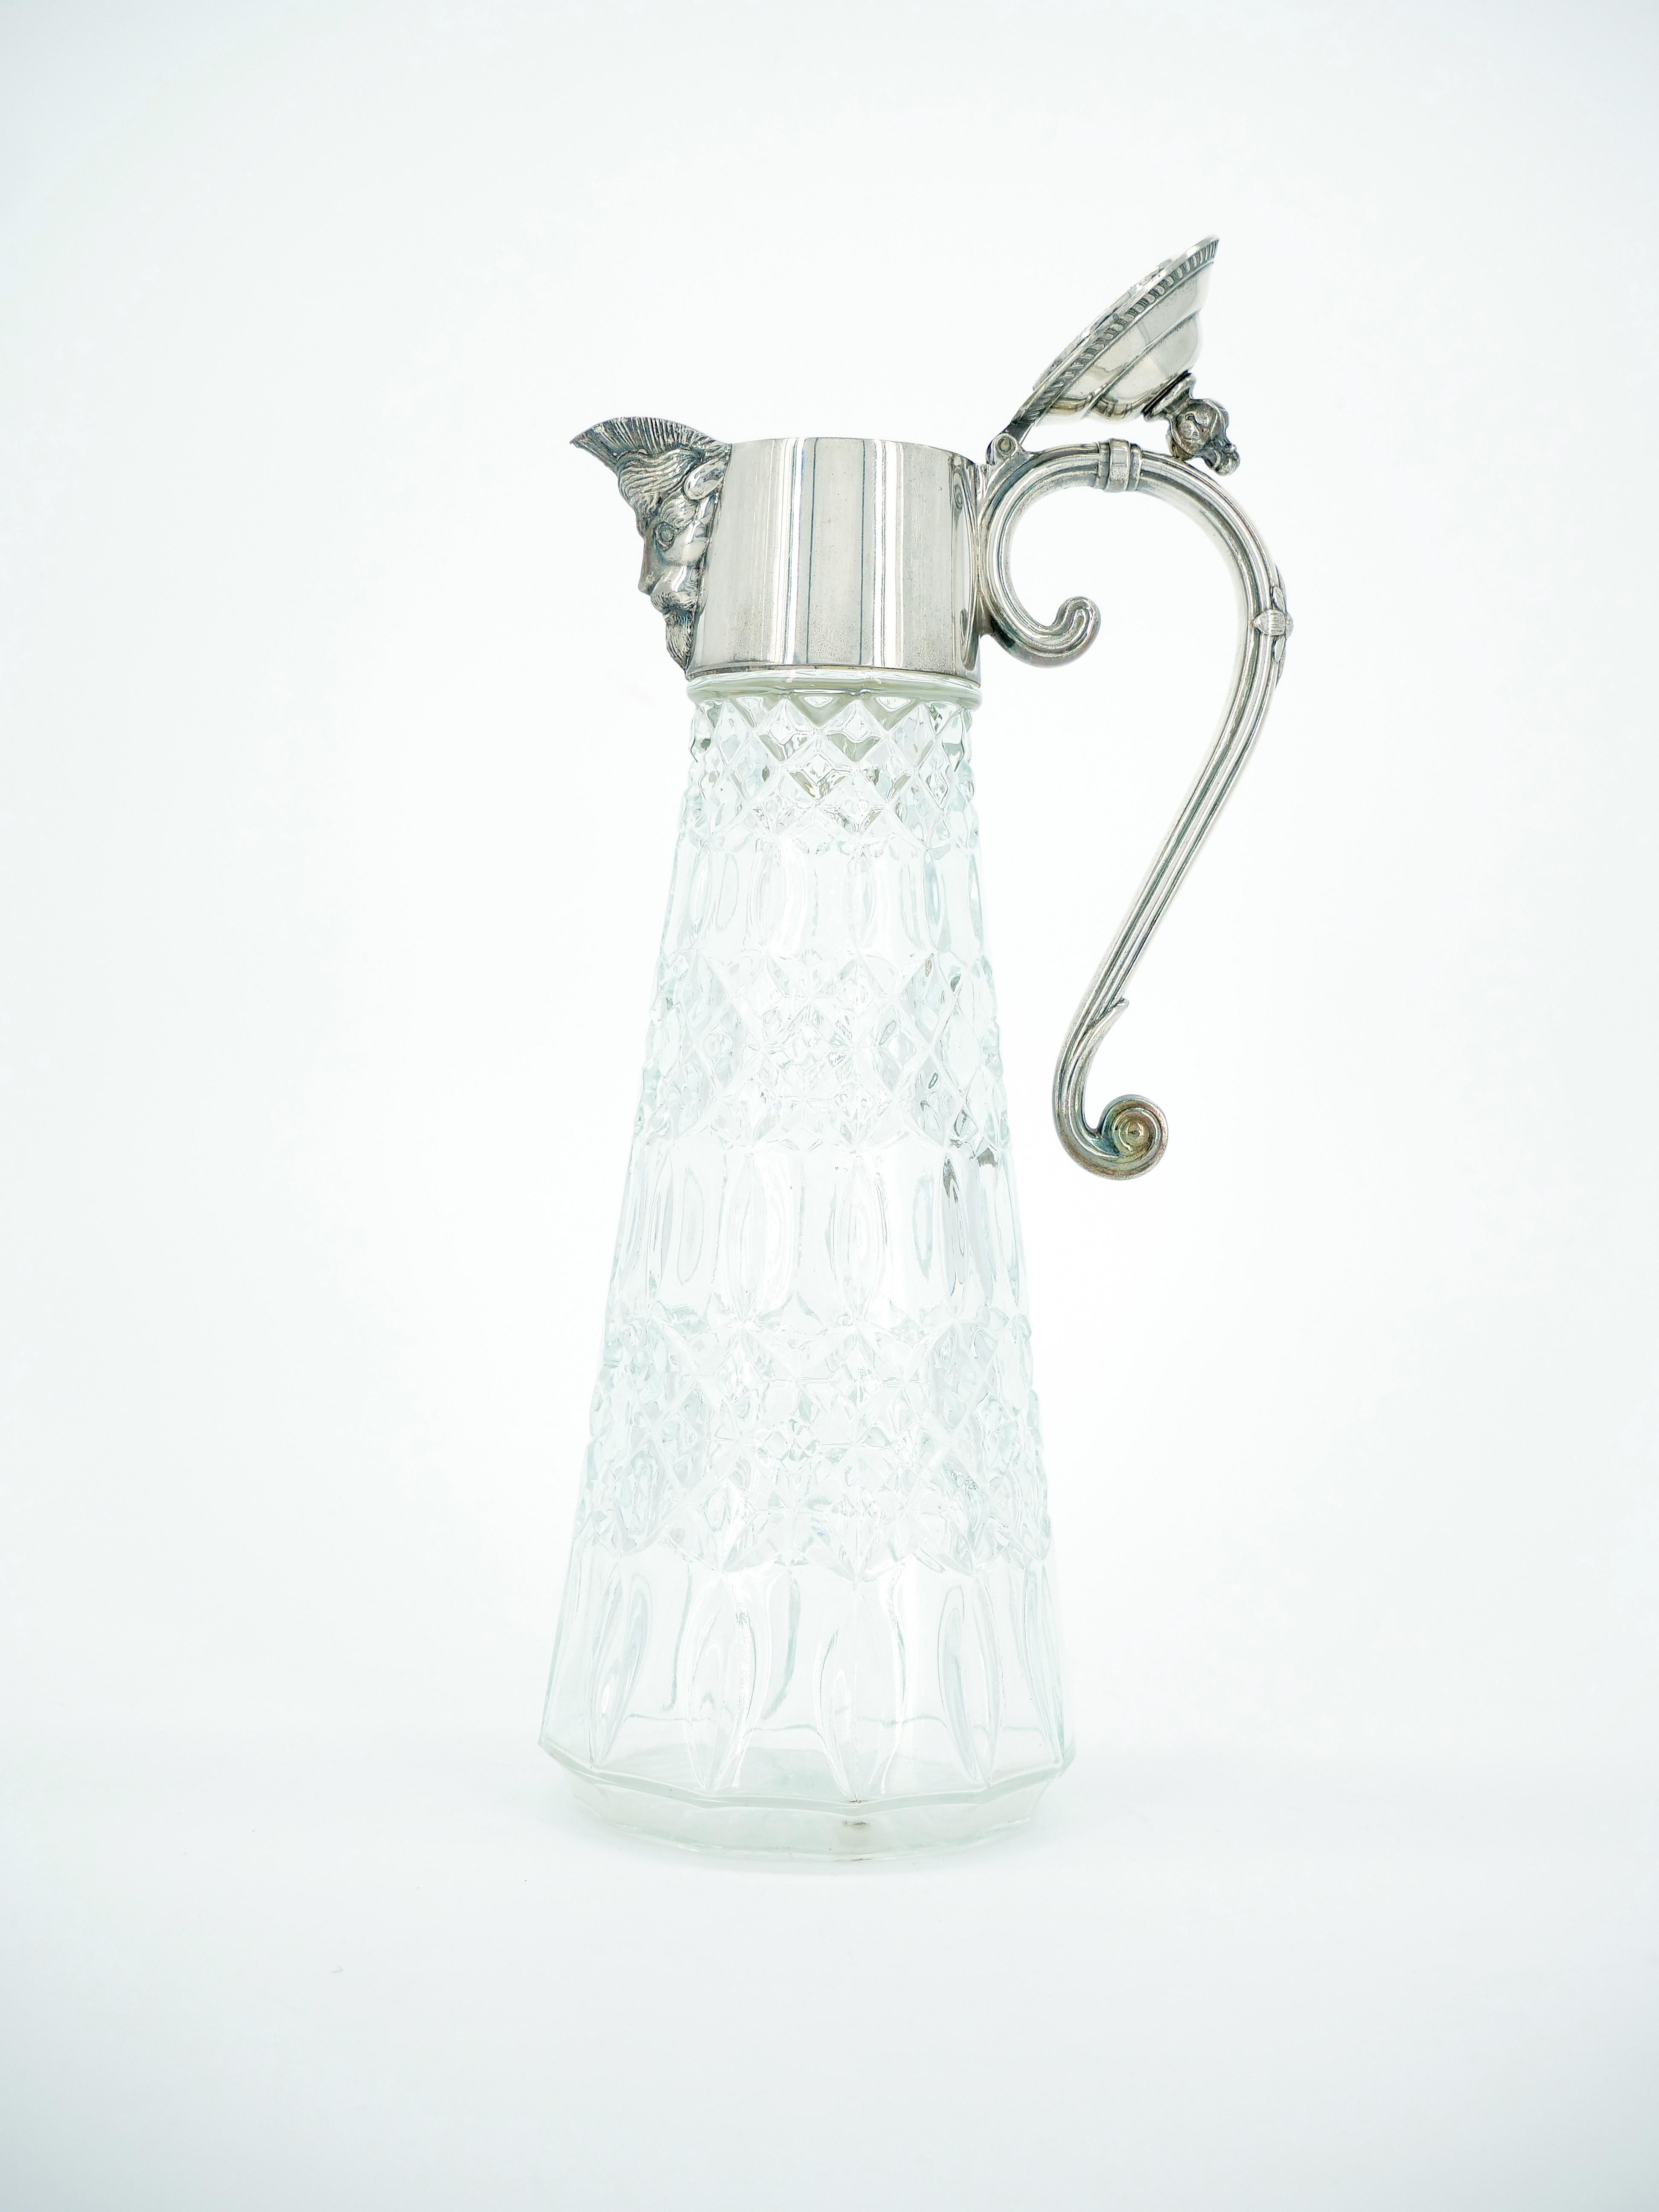 19th Century Silver Plate Holding Top / Cut Glass Claret Jug / Serving Pitcher In Good Condition For Sale In Tarry Town, NY